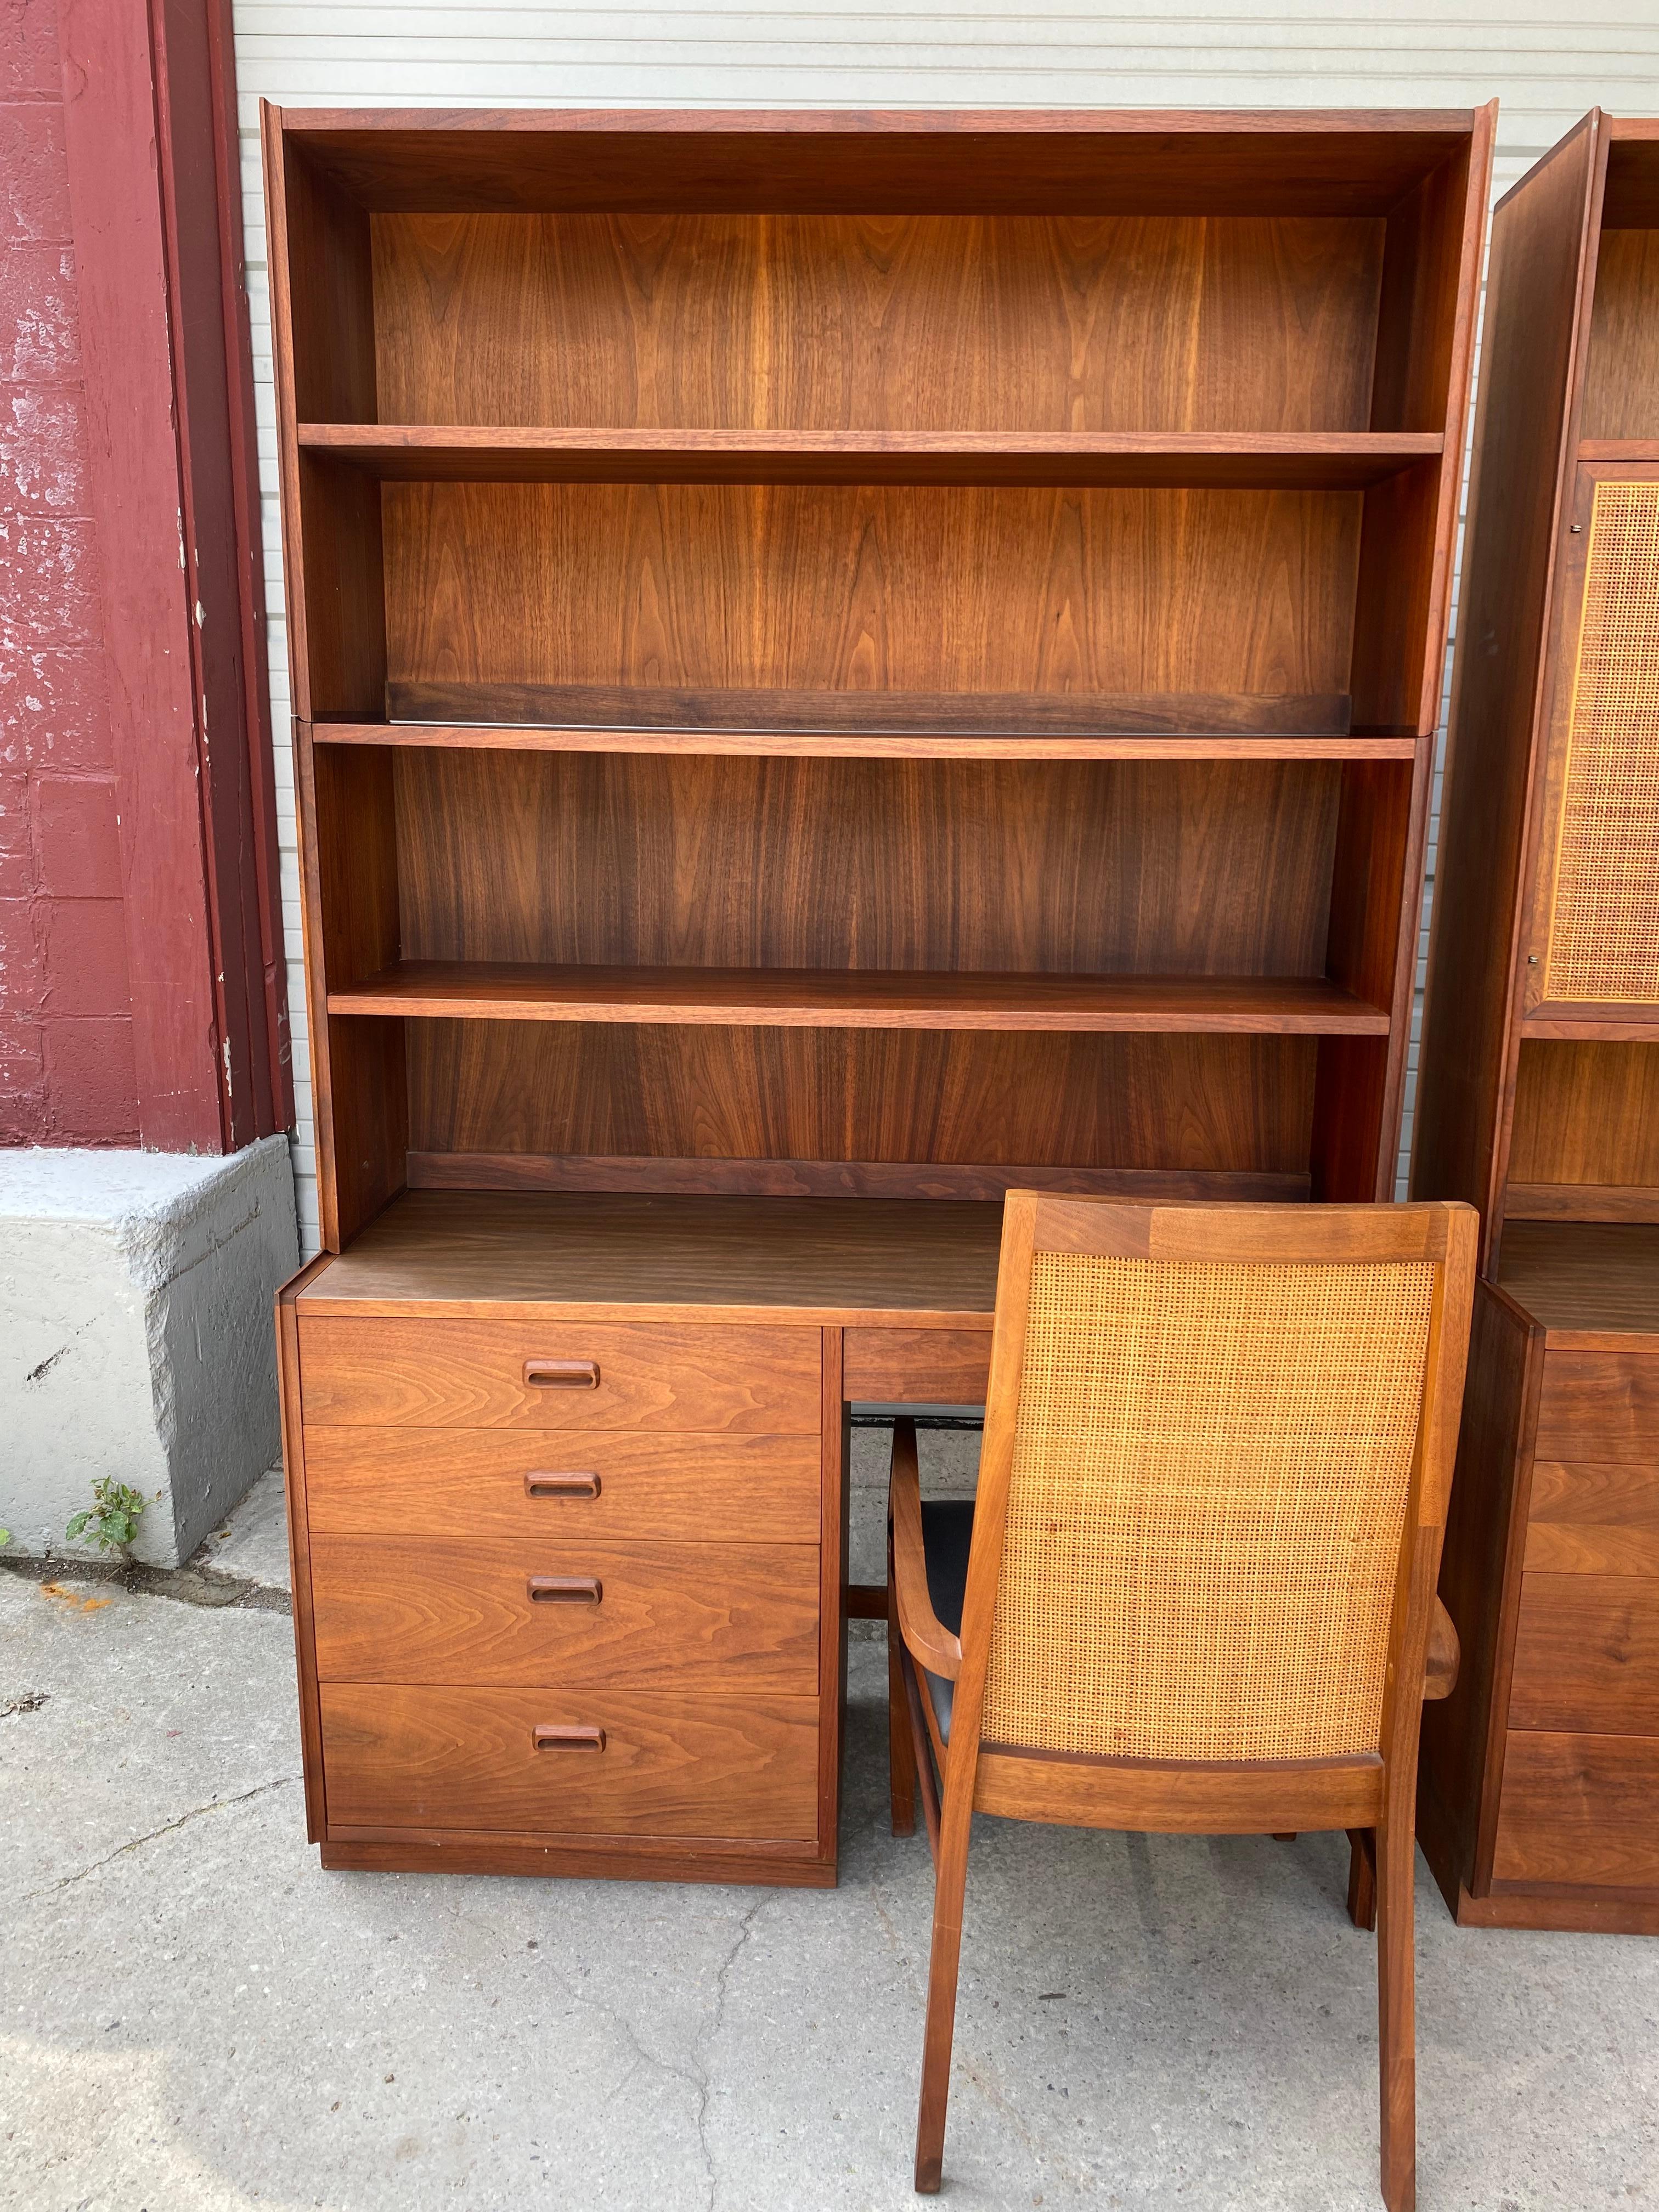 Stunning Mid-Century Modern Suite designed by Jack Cartwright (FOUNDER'S). sUITE INCLUDES,,,, Desk with 4 drawers (left) large center drawer with bookcase top,,4 drawer chest with top storage,,caned doors,,,Desk and chest with dovetail drawers,,nice